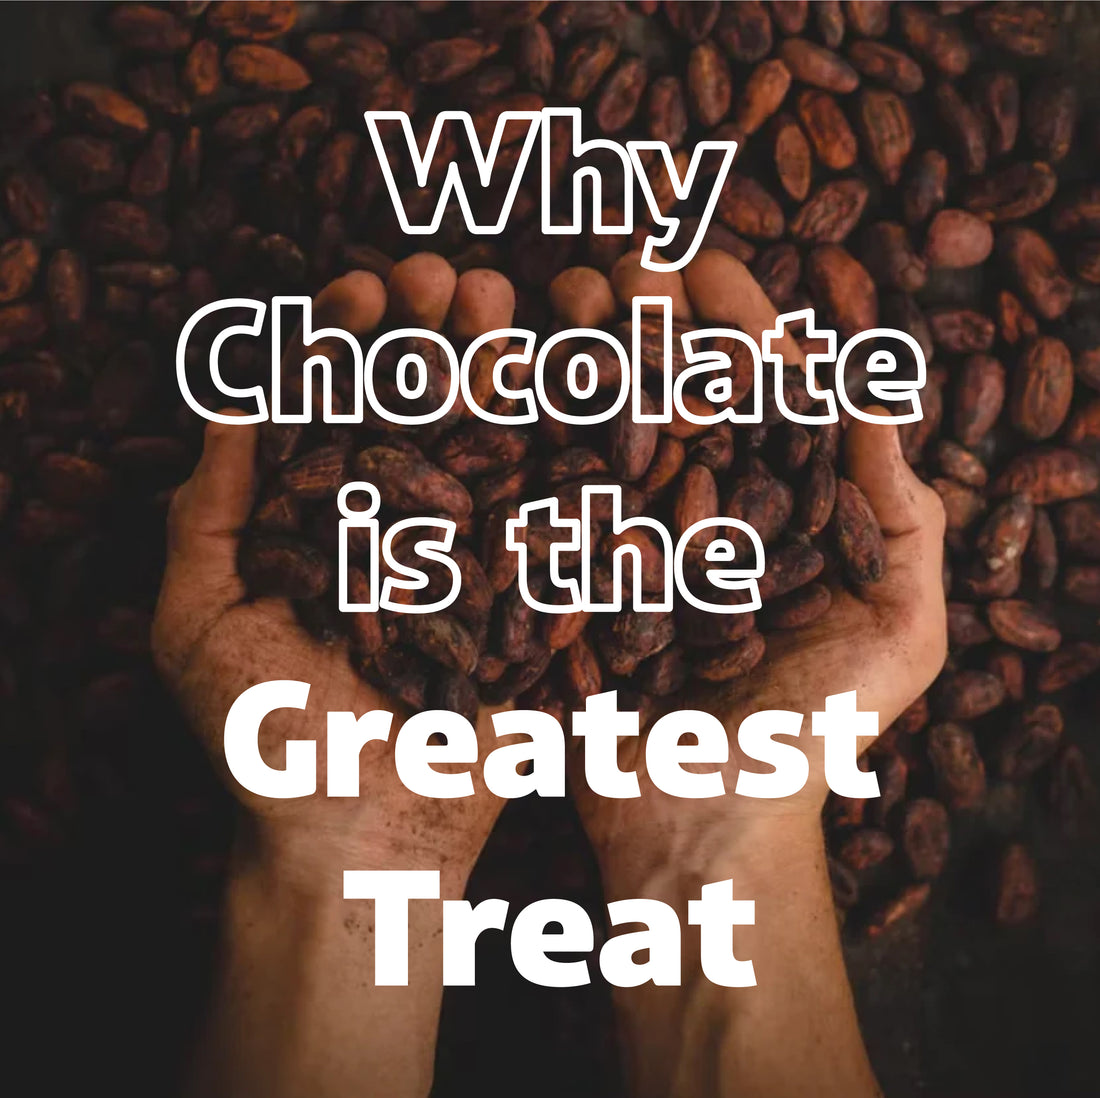 Why Chocolate is the Greatest Treat